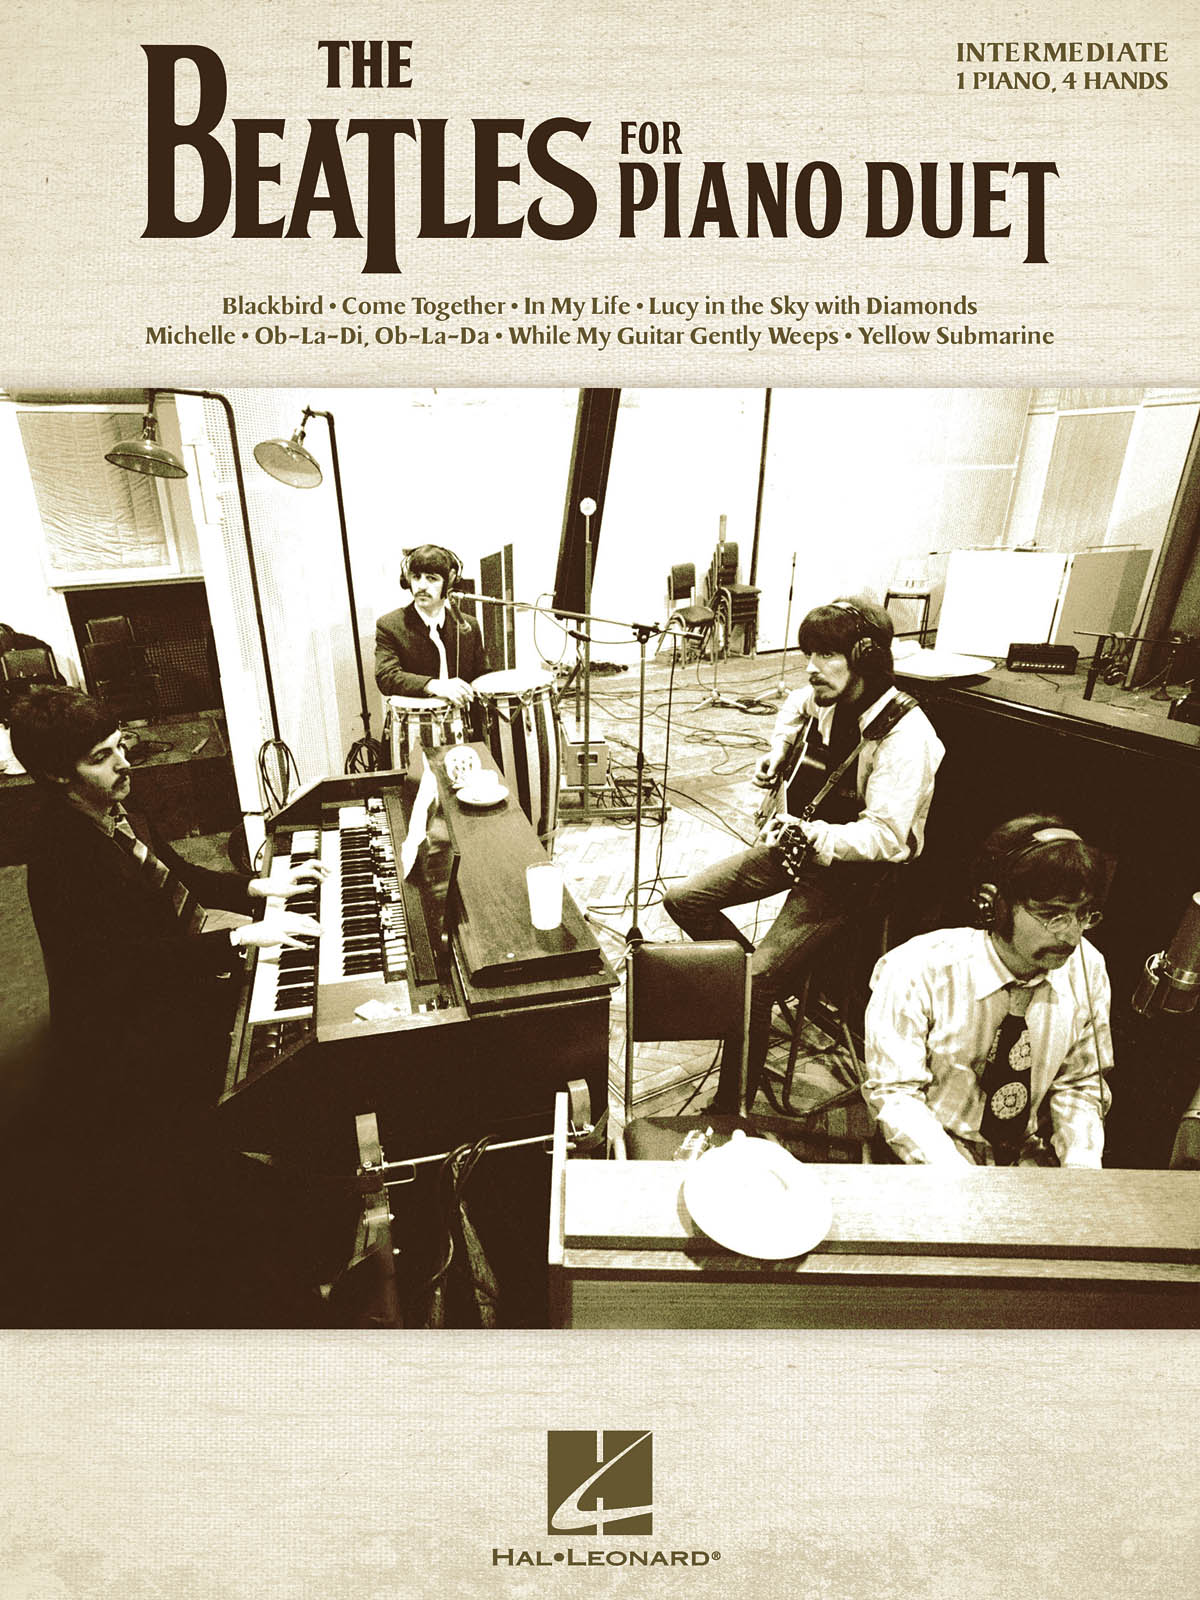 The Beatles for Piano Duet - Intermediate Level - 1 Piano, 4 Hands